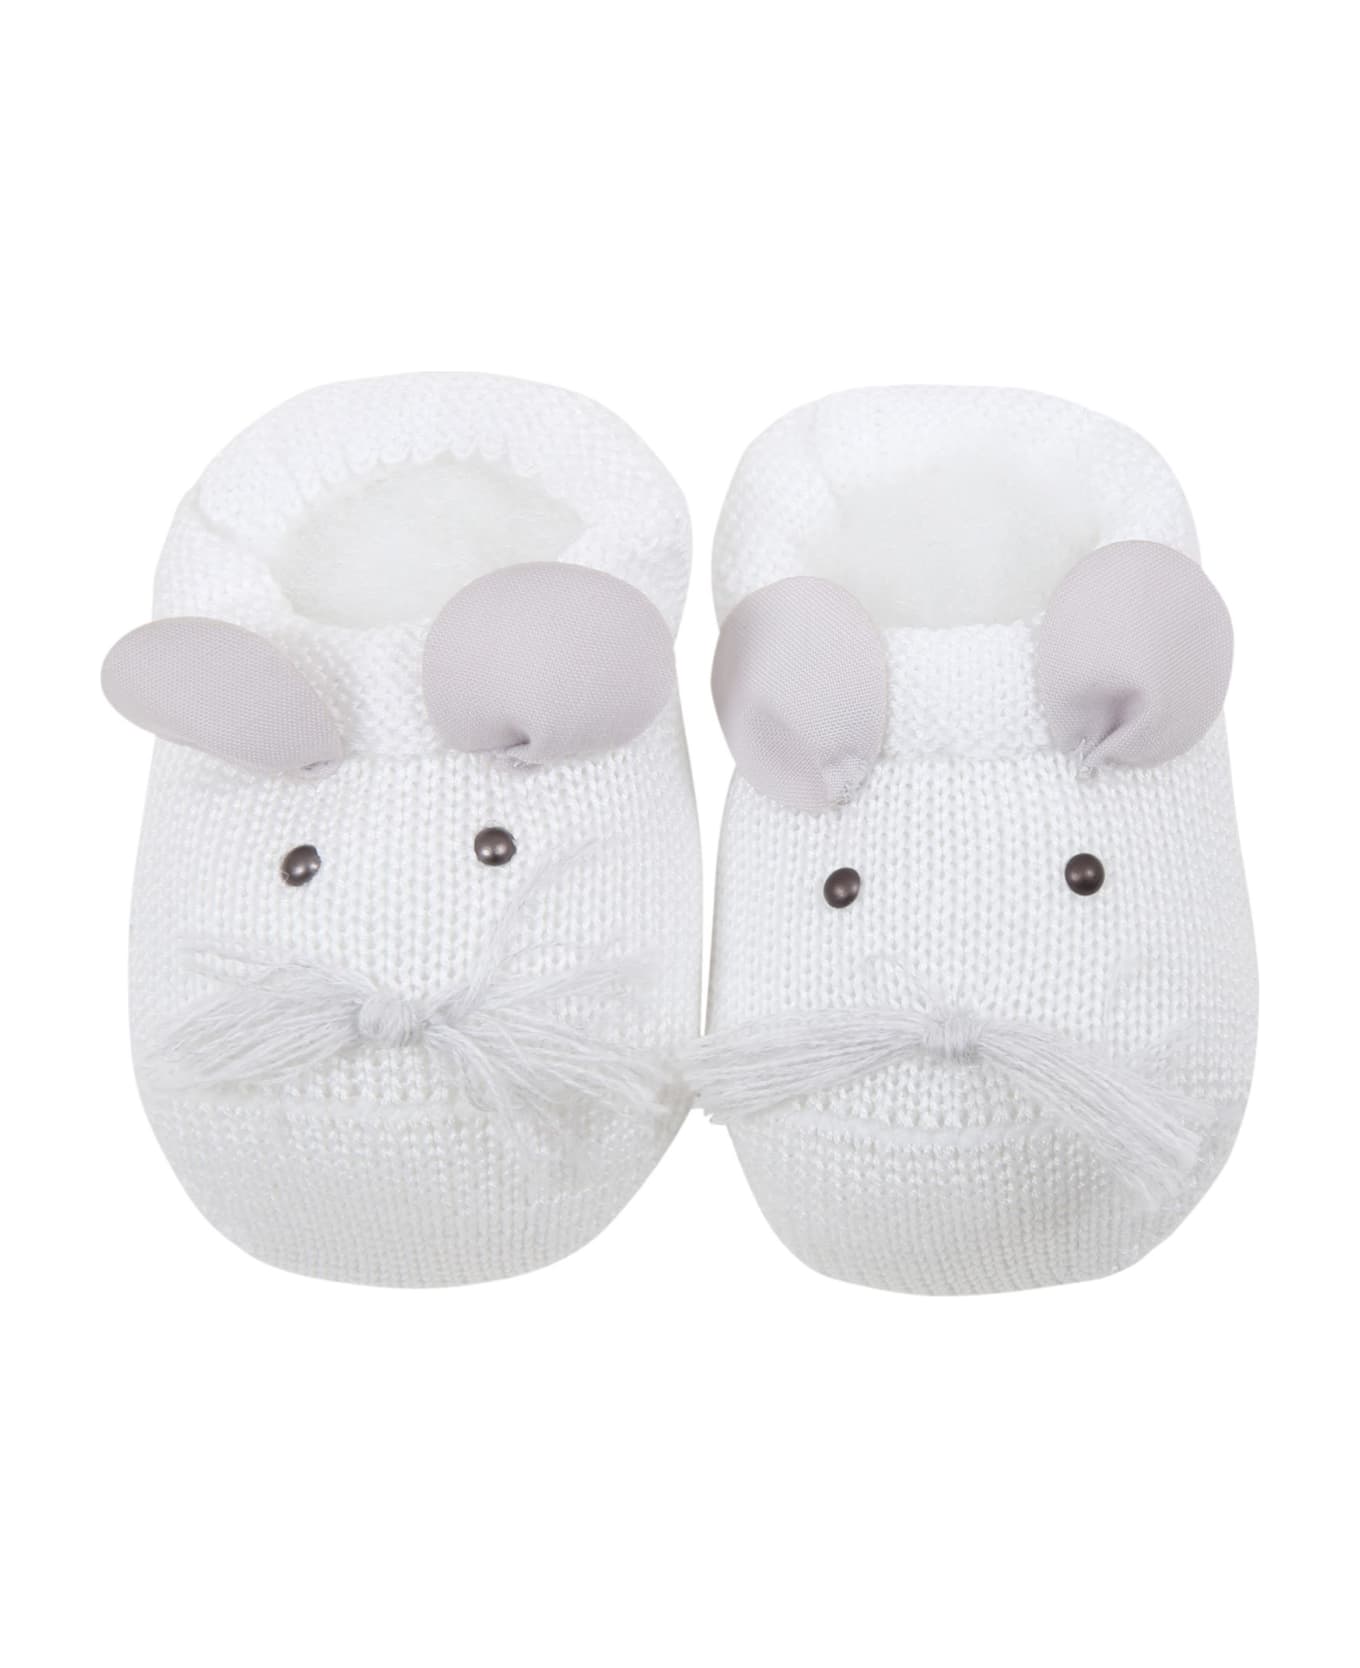 Story Loris White Slippers For Baby Boy - White アクセサリー＆ギフト